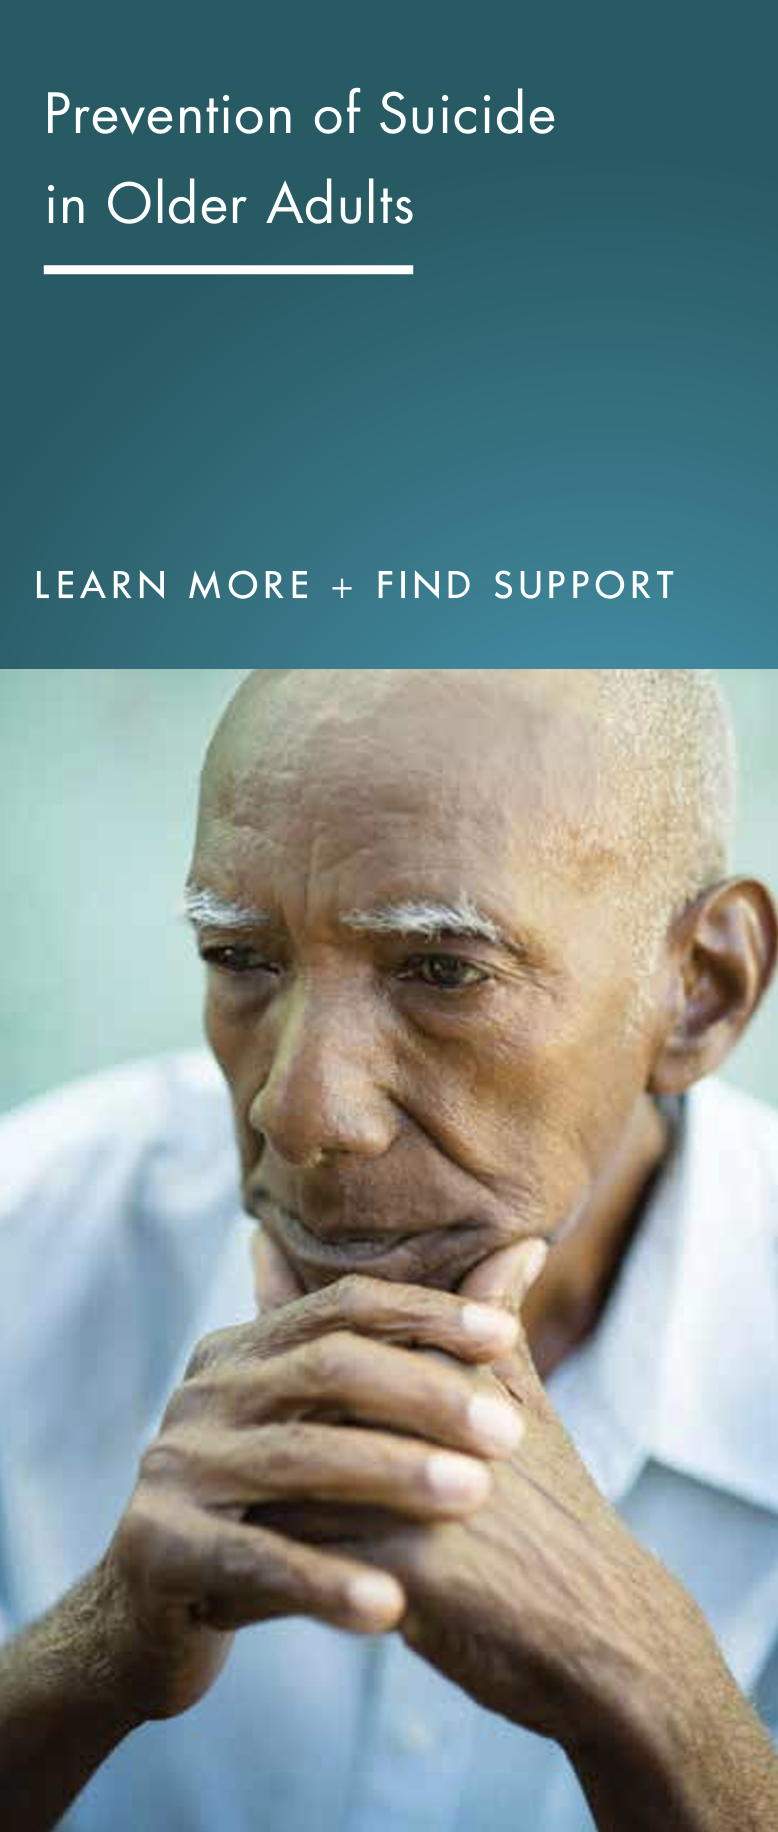 A borchure cover with a dark teal colour block with white lettering and a photograph of a dark-skinned man looking pensive with his chin resting on his hands.